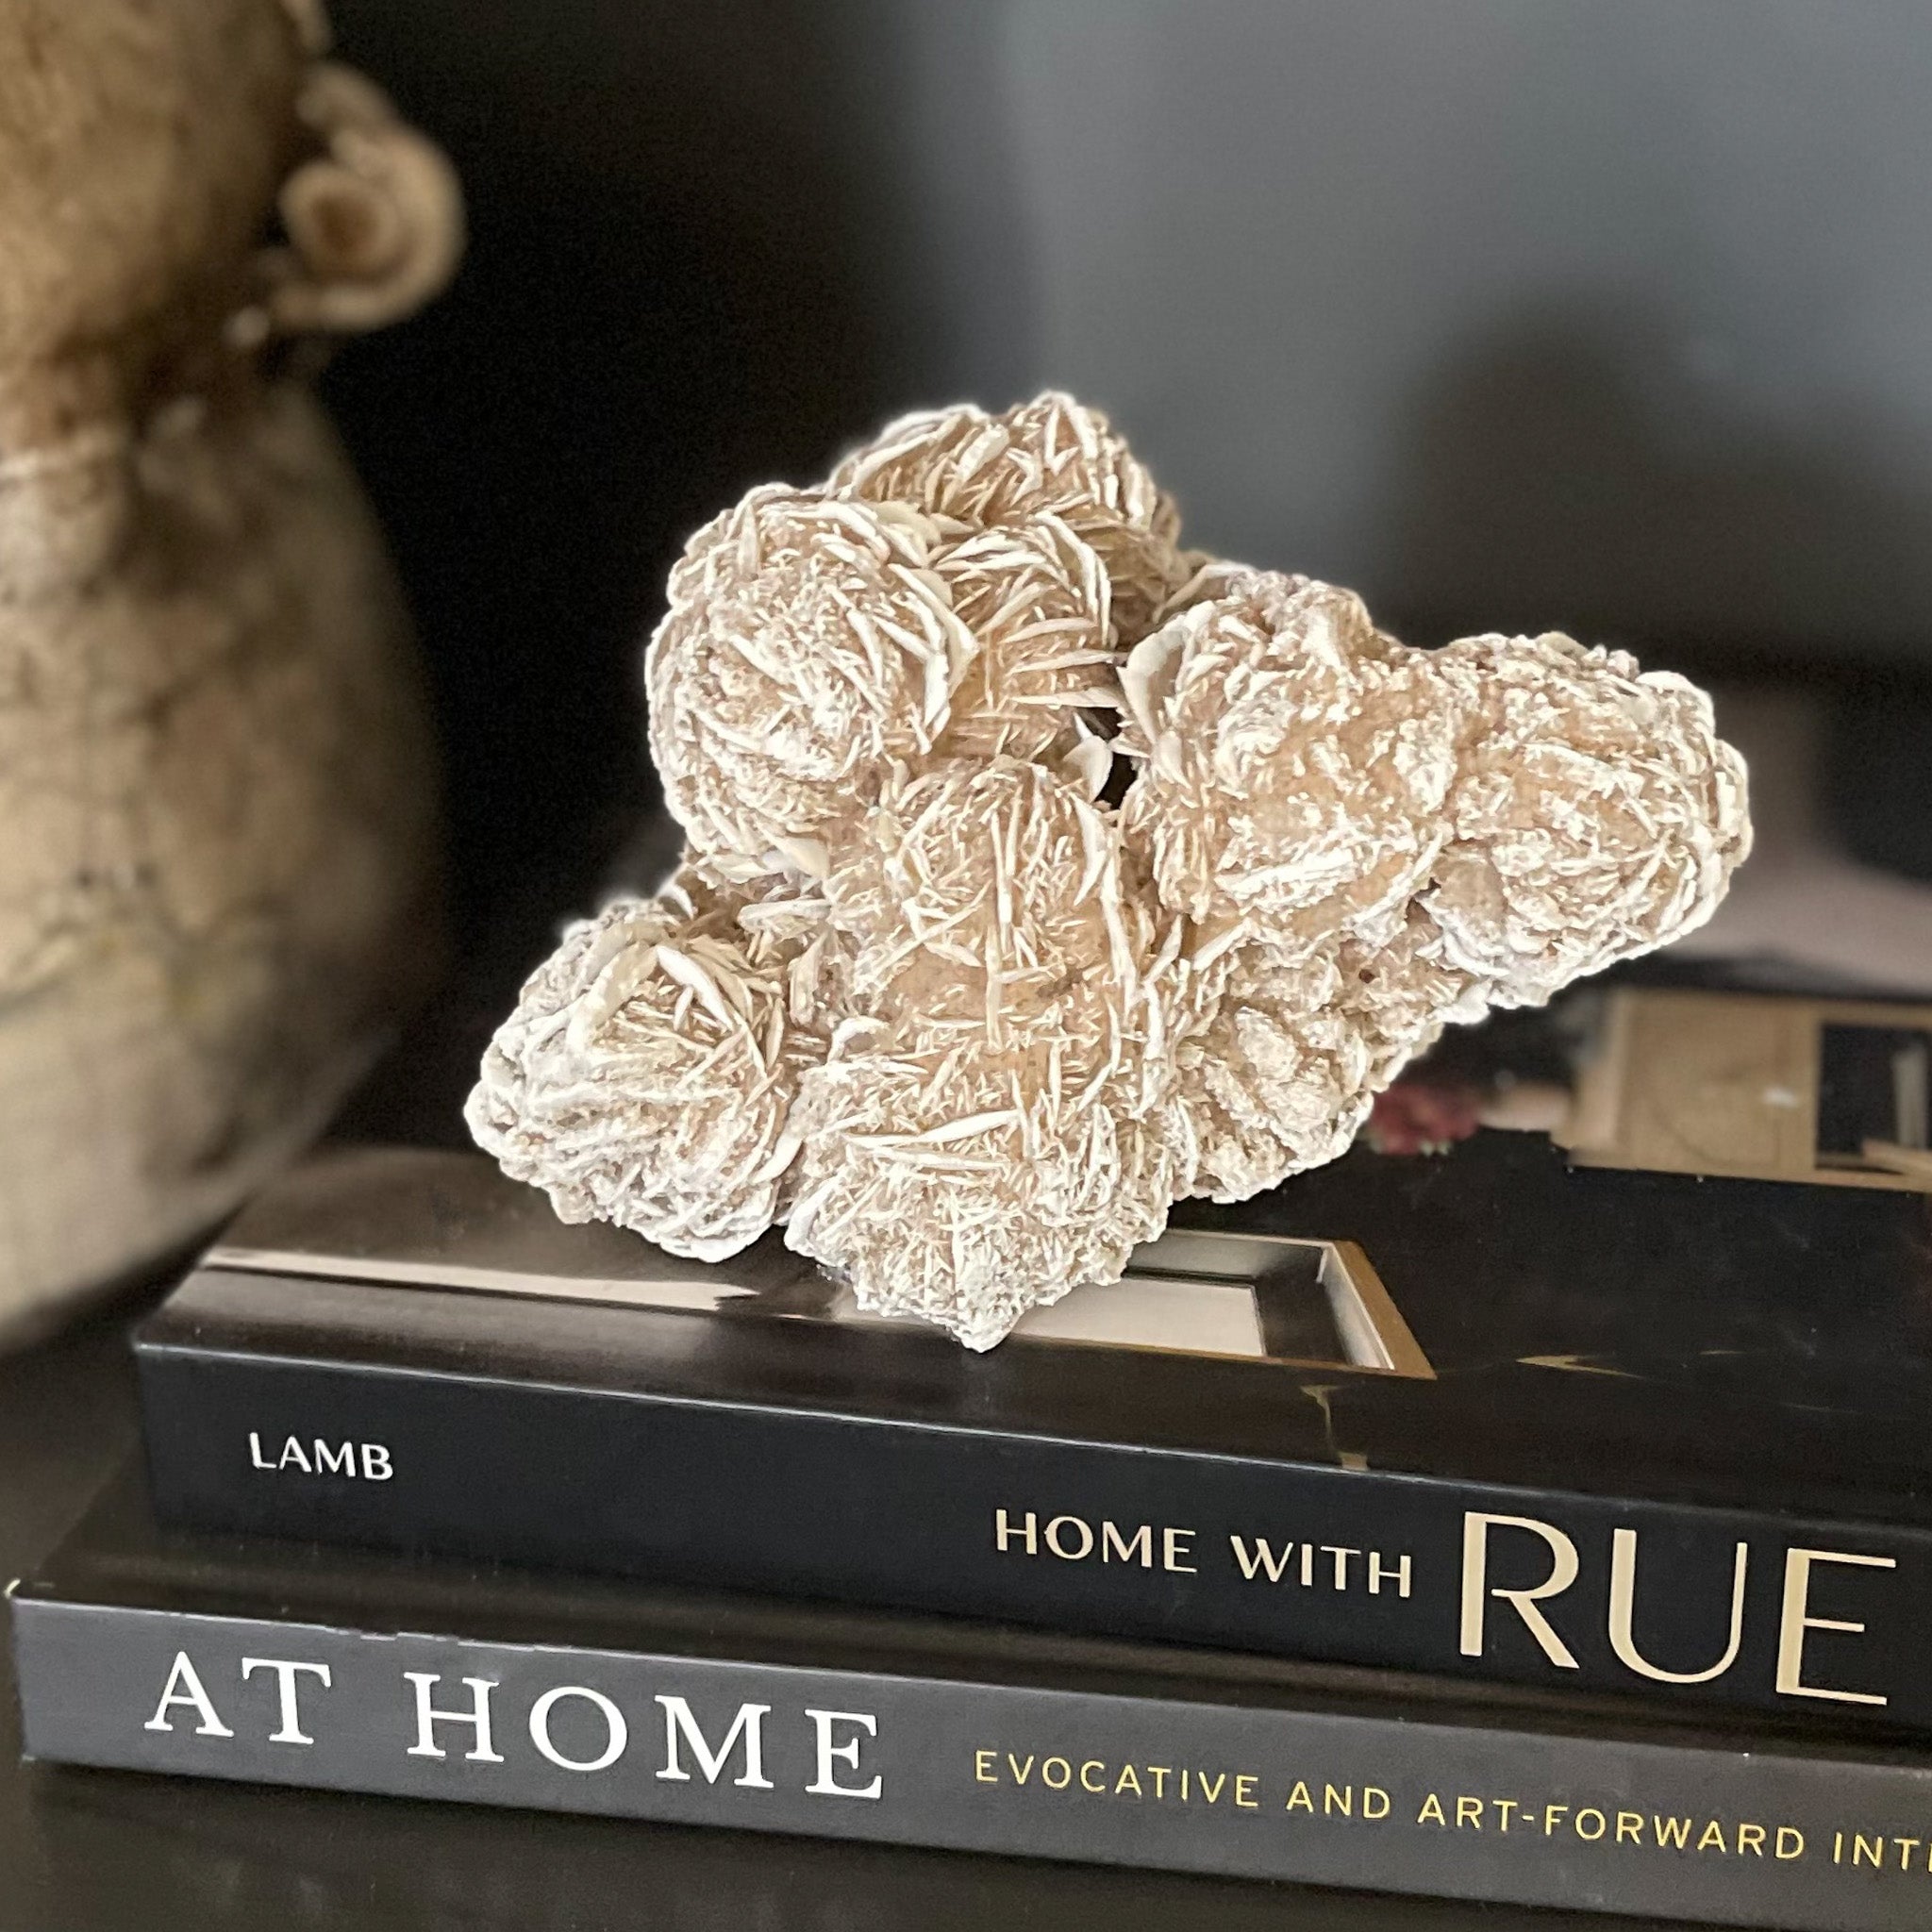 Mexican Desert Rose Gypsum, Natural Home Accents, Decorative Objects